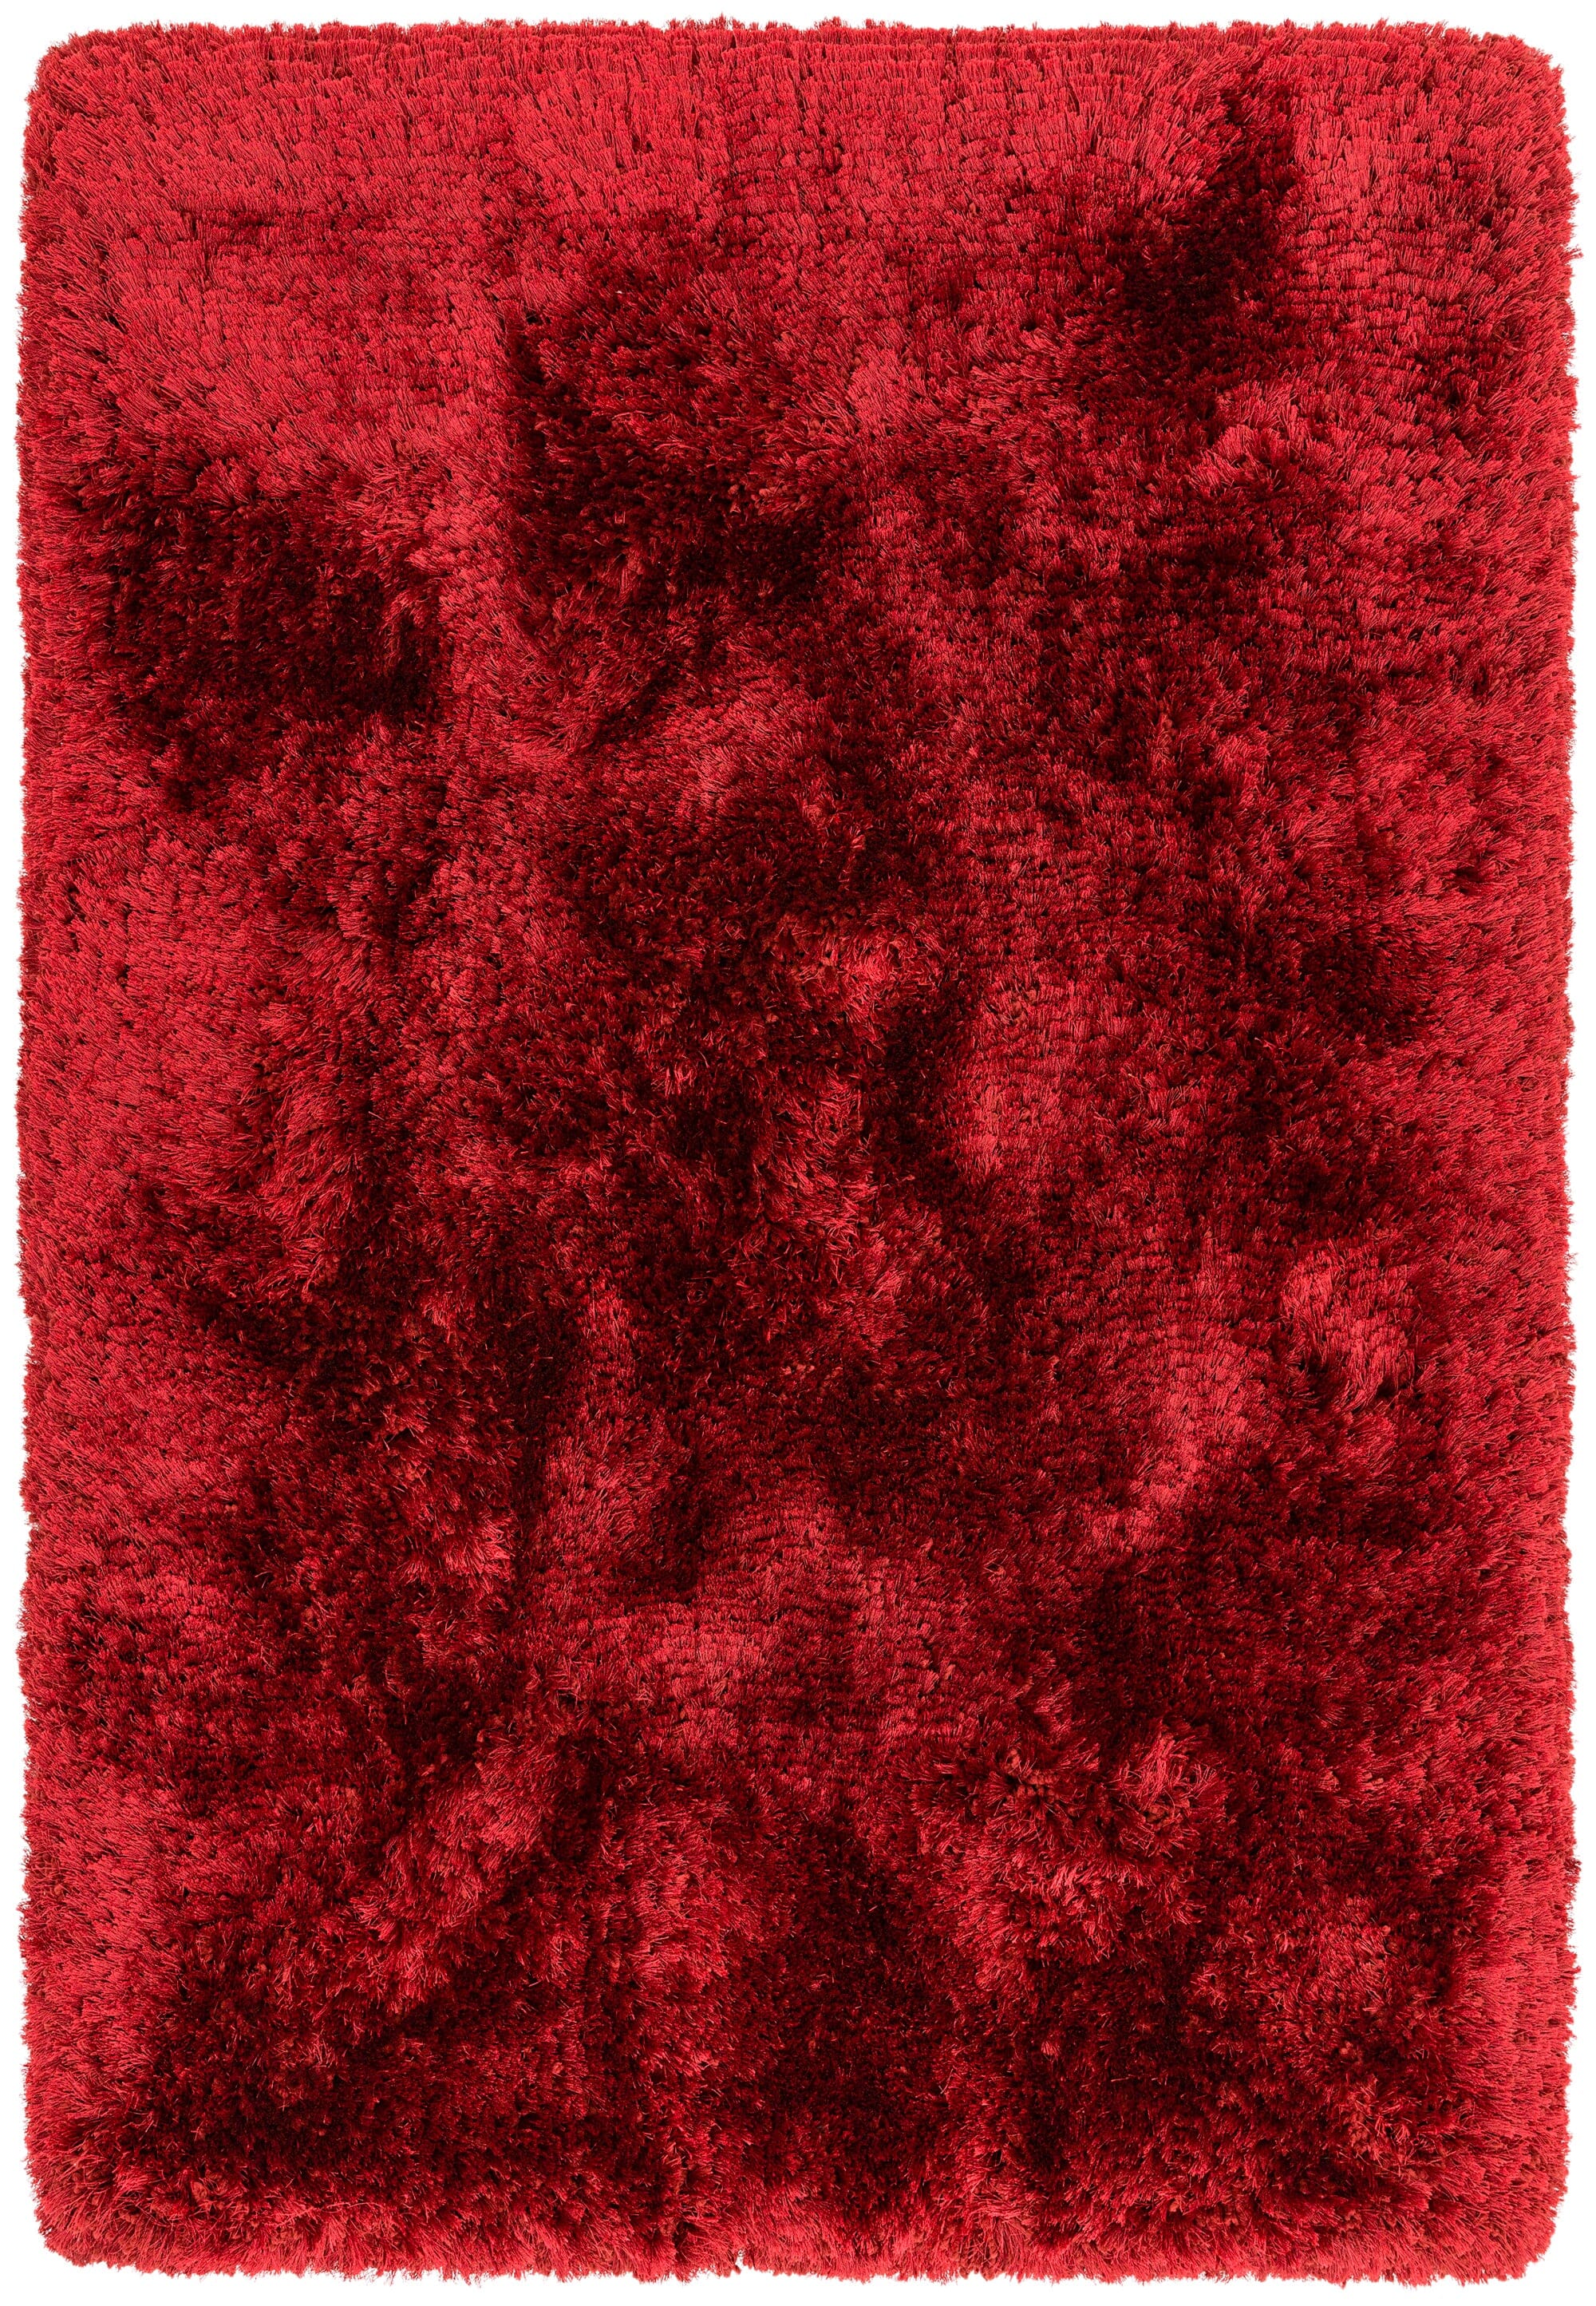 Plush Red Ultra Thick Shaggy Rug